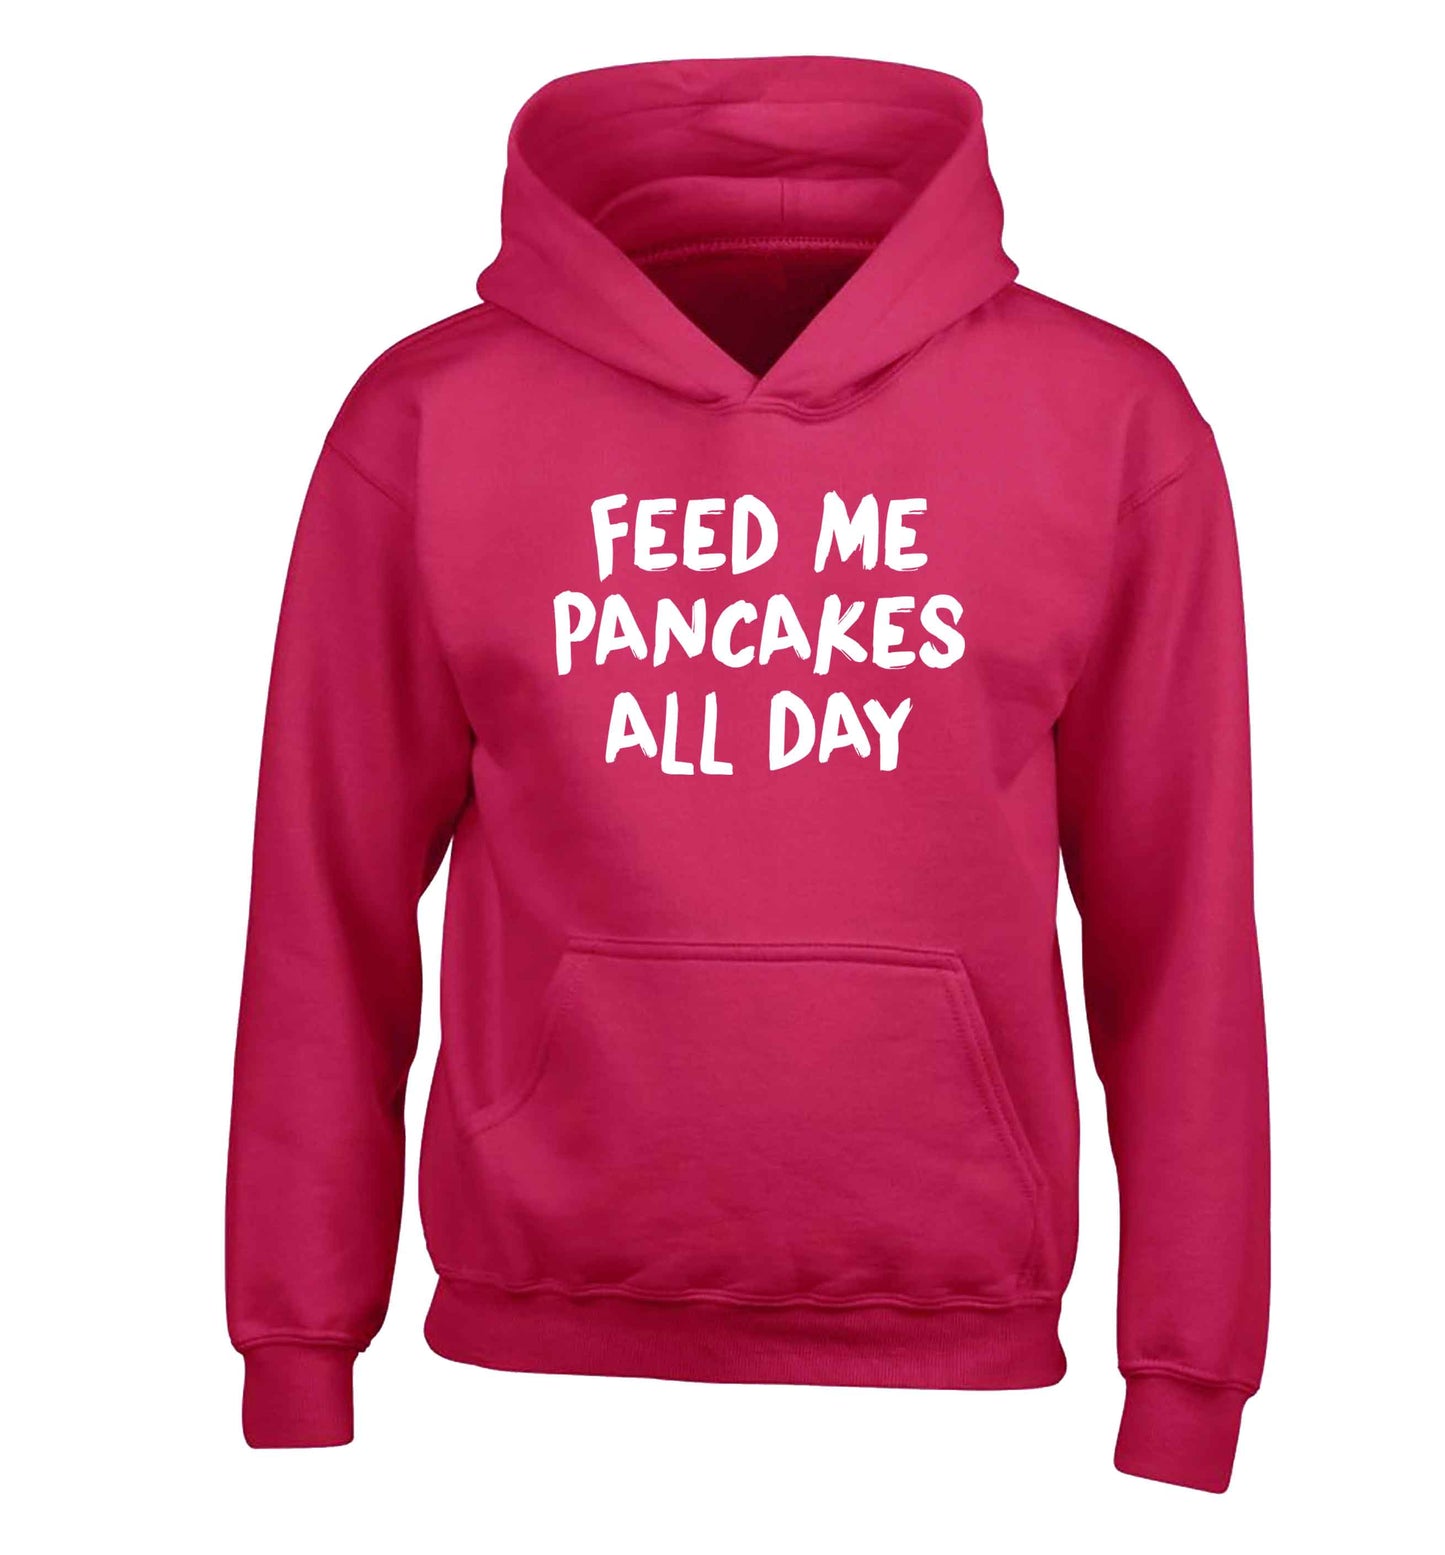 Feed me pancakes all day children's pink hoodie 12-13 Years